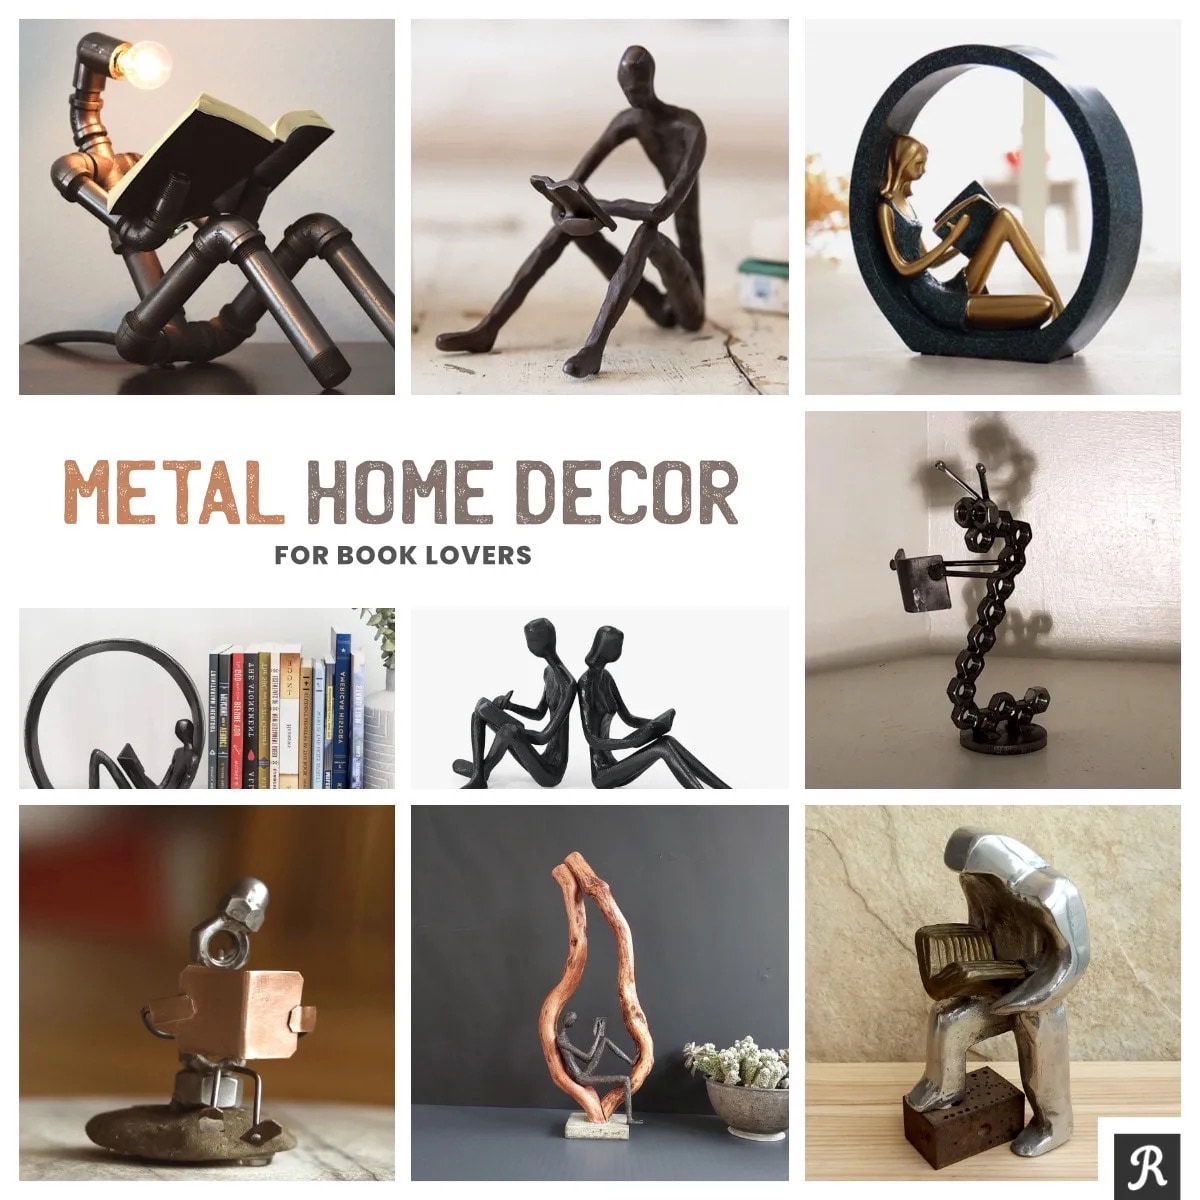 Top metal home decor metal accessories for booklovers